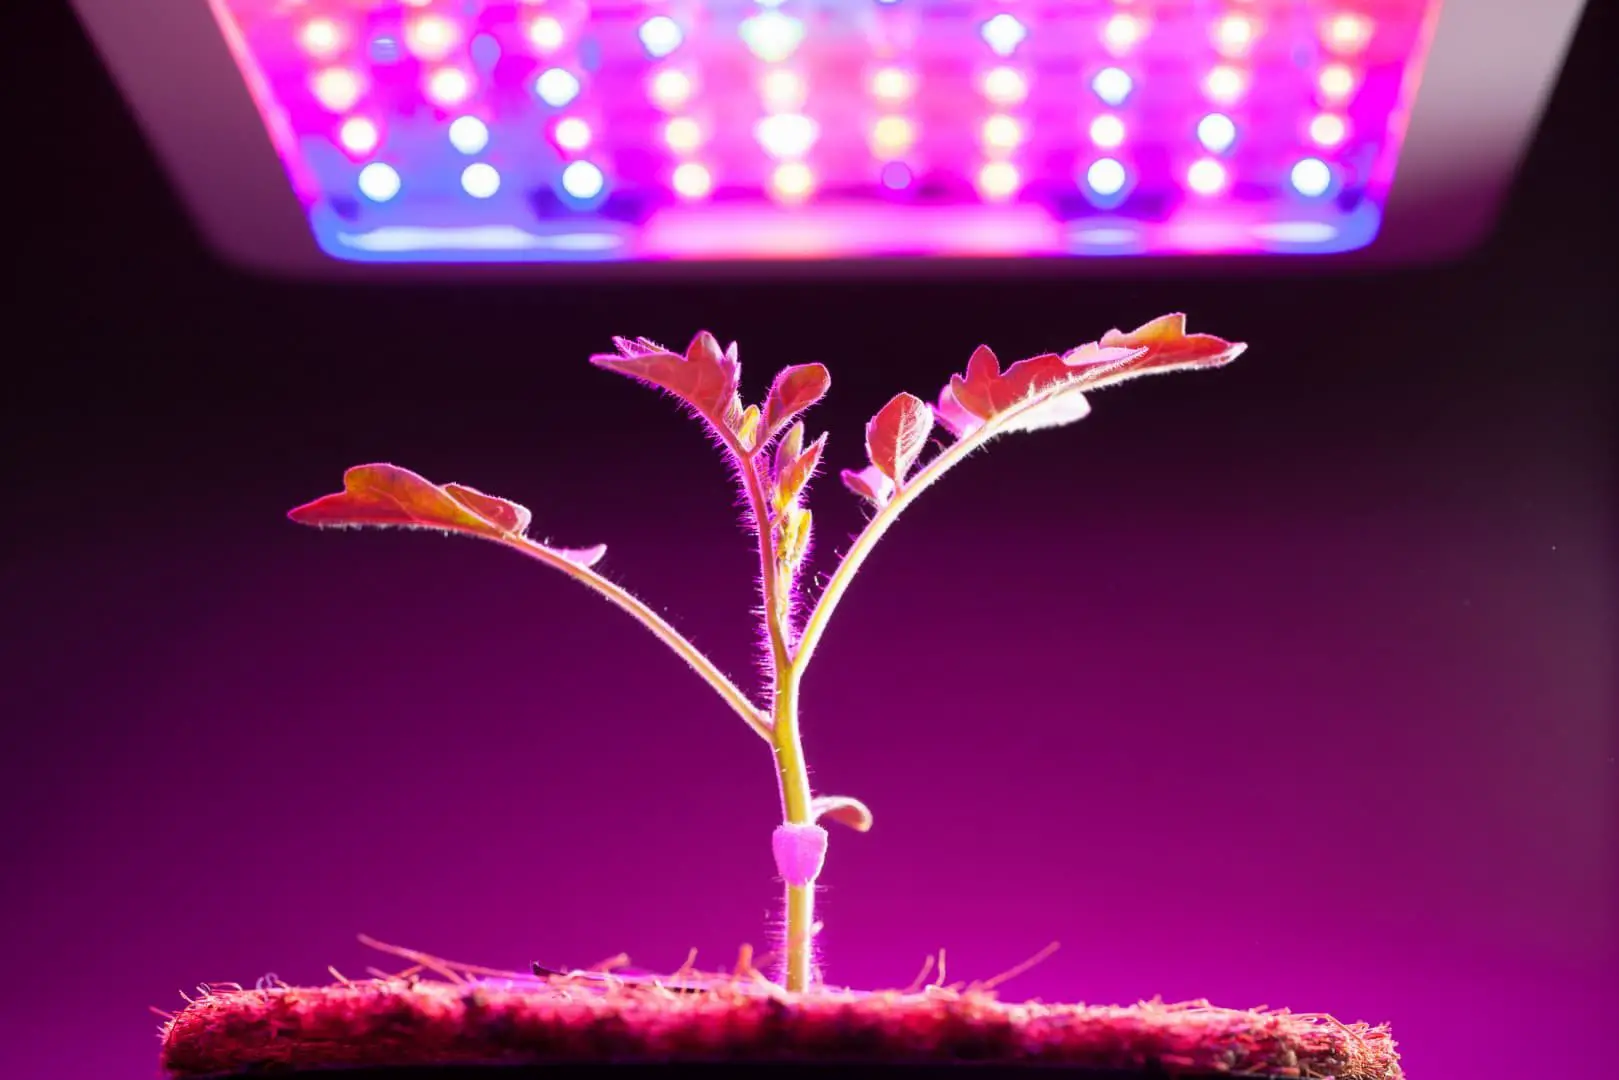 % There are a variety of different types of grow lights available, each with its own benefits and drawbacks. Choosing the right type of grow light is important for getting the most out of your plants.